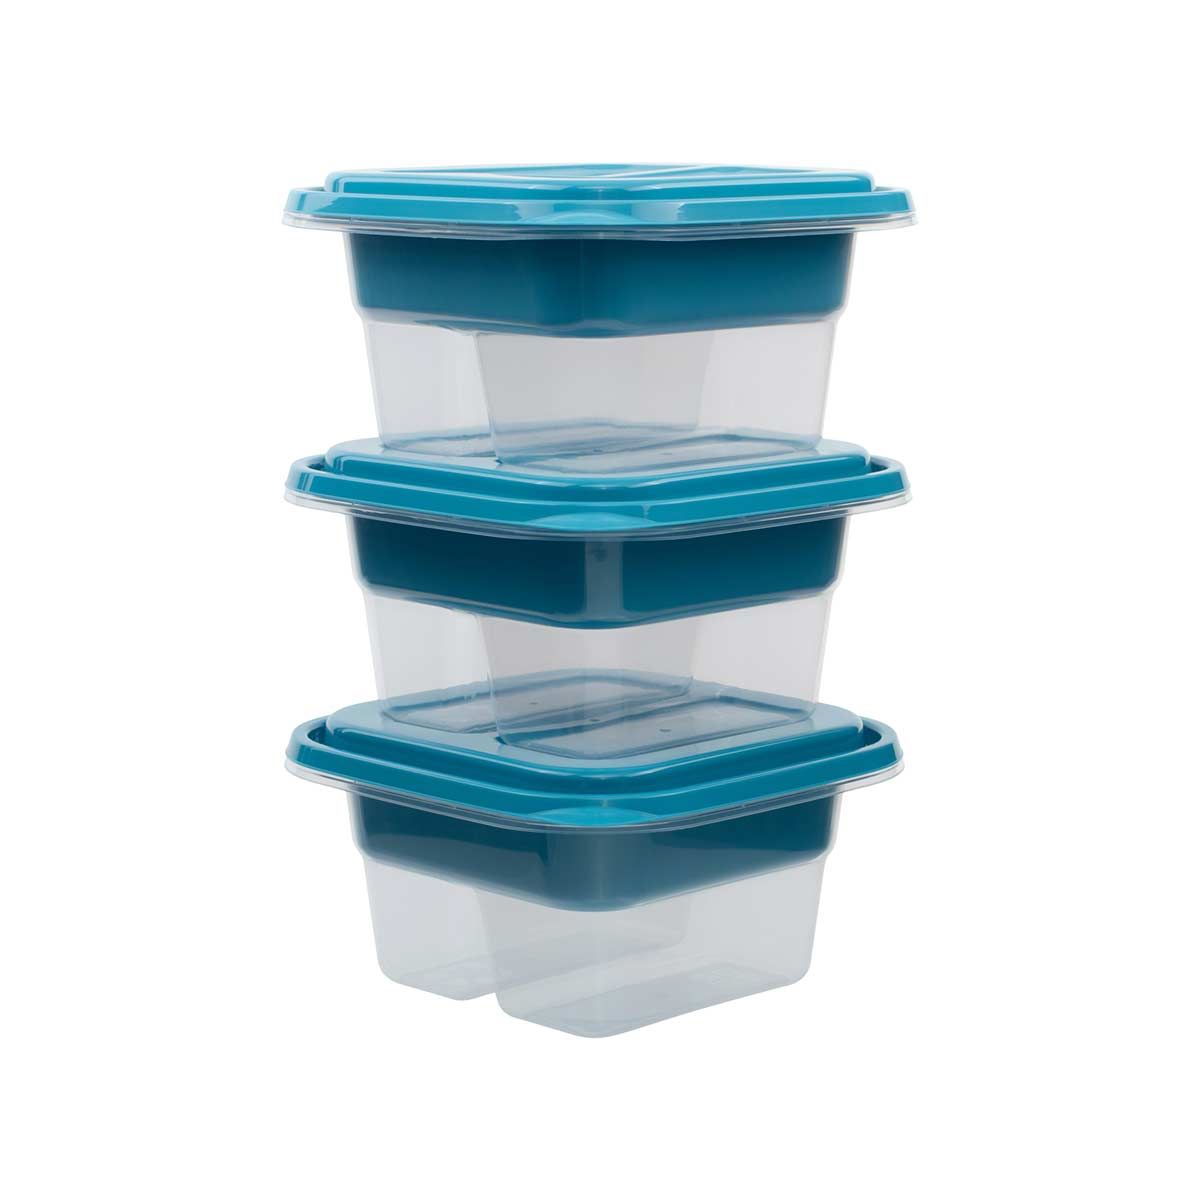 GoodCook Meals on the Run Sandwich Container, Locking Lid